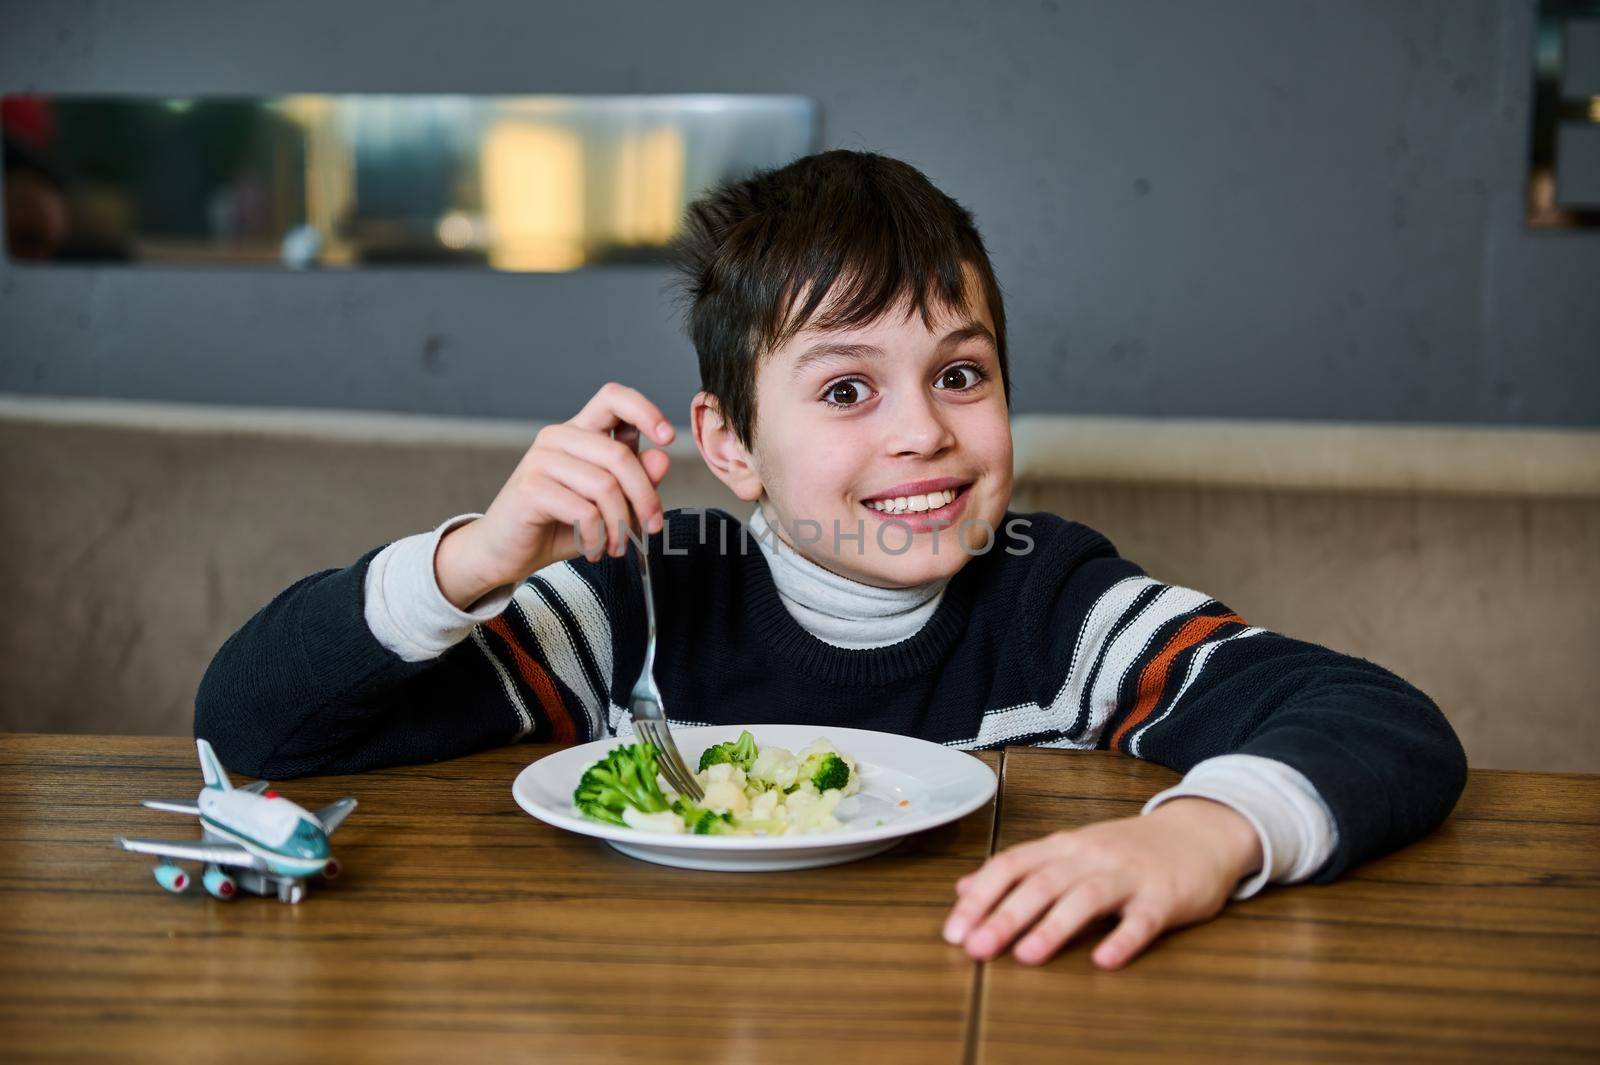 Adorable European boy smiling as he looks at the camera while enjoying a healthy vegan lunch in the canteen of the departure terminal of an international airport. His airplane toy is on a wooden table